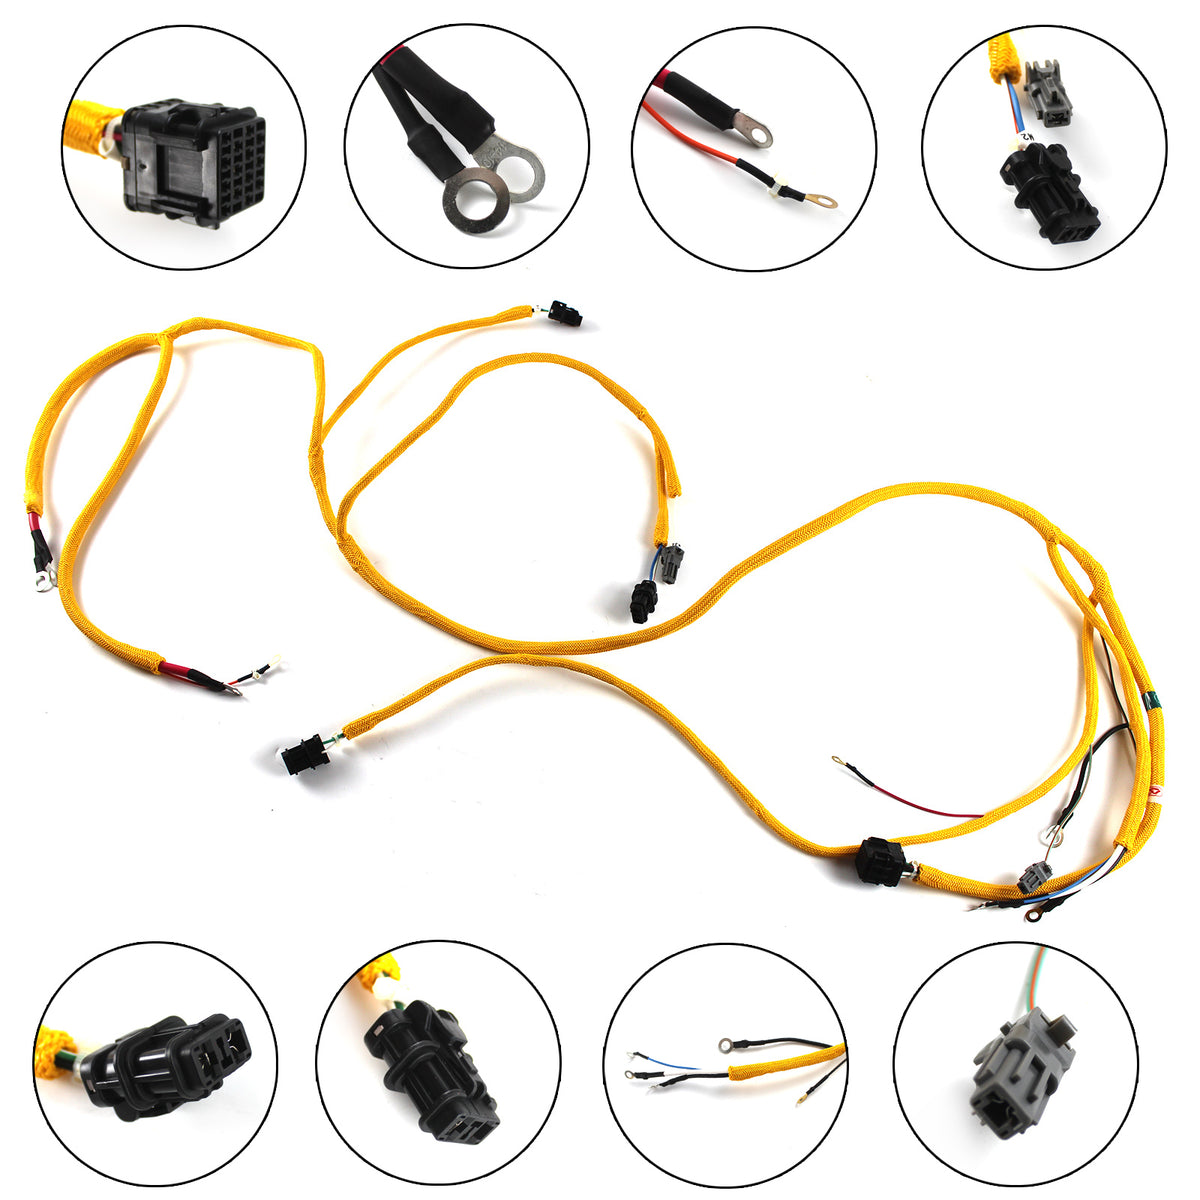 6207-81-4351 Engine harness for PC200-6 PC210-6 PC220-6 Excavator 6D95 Engine